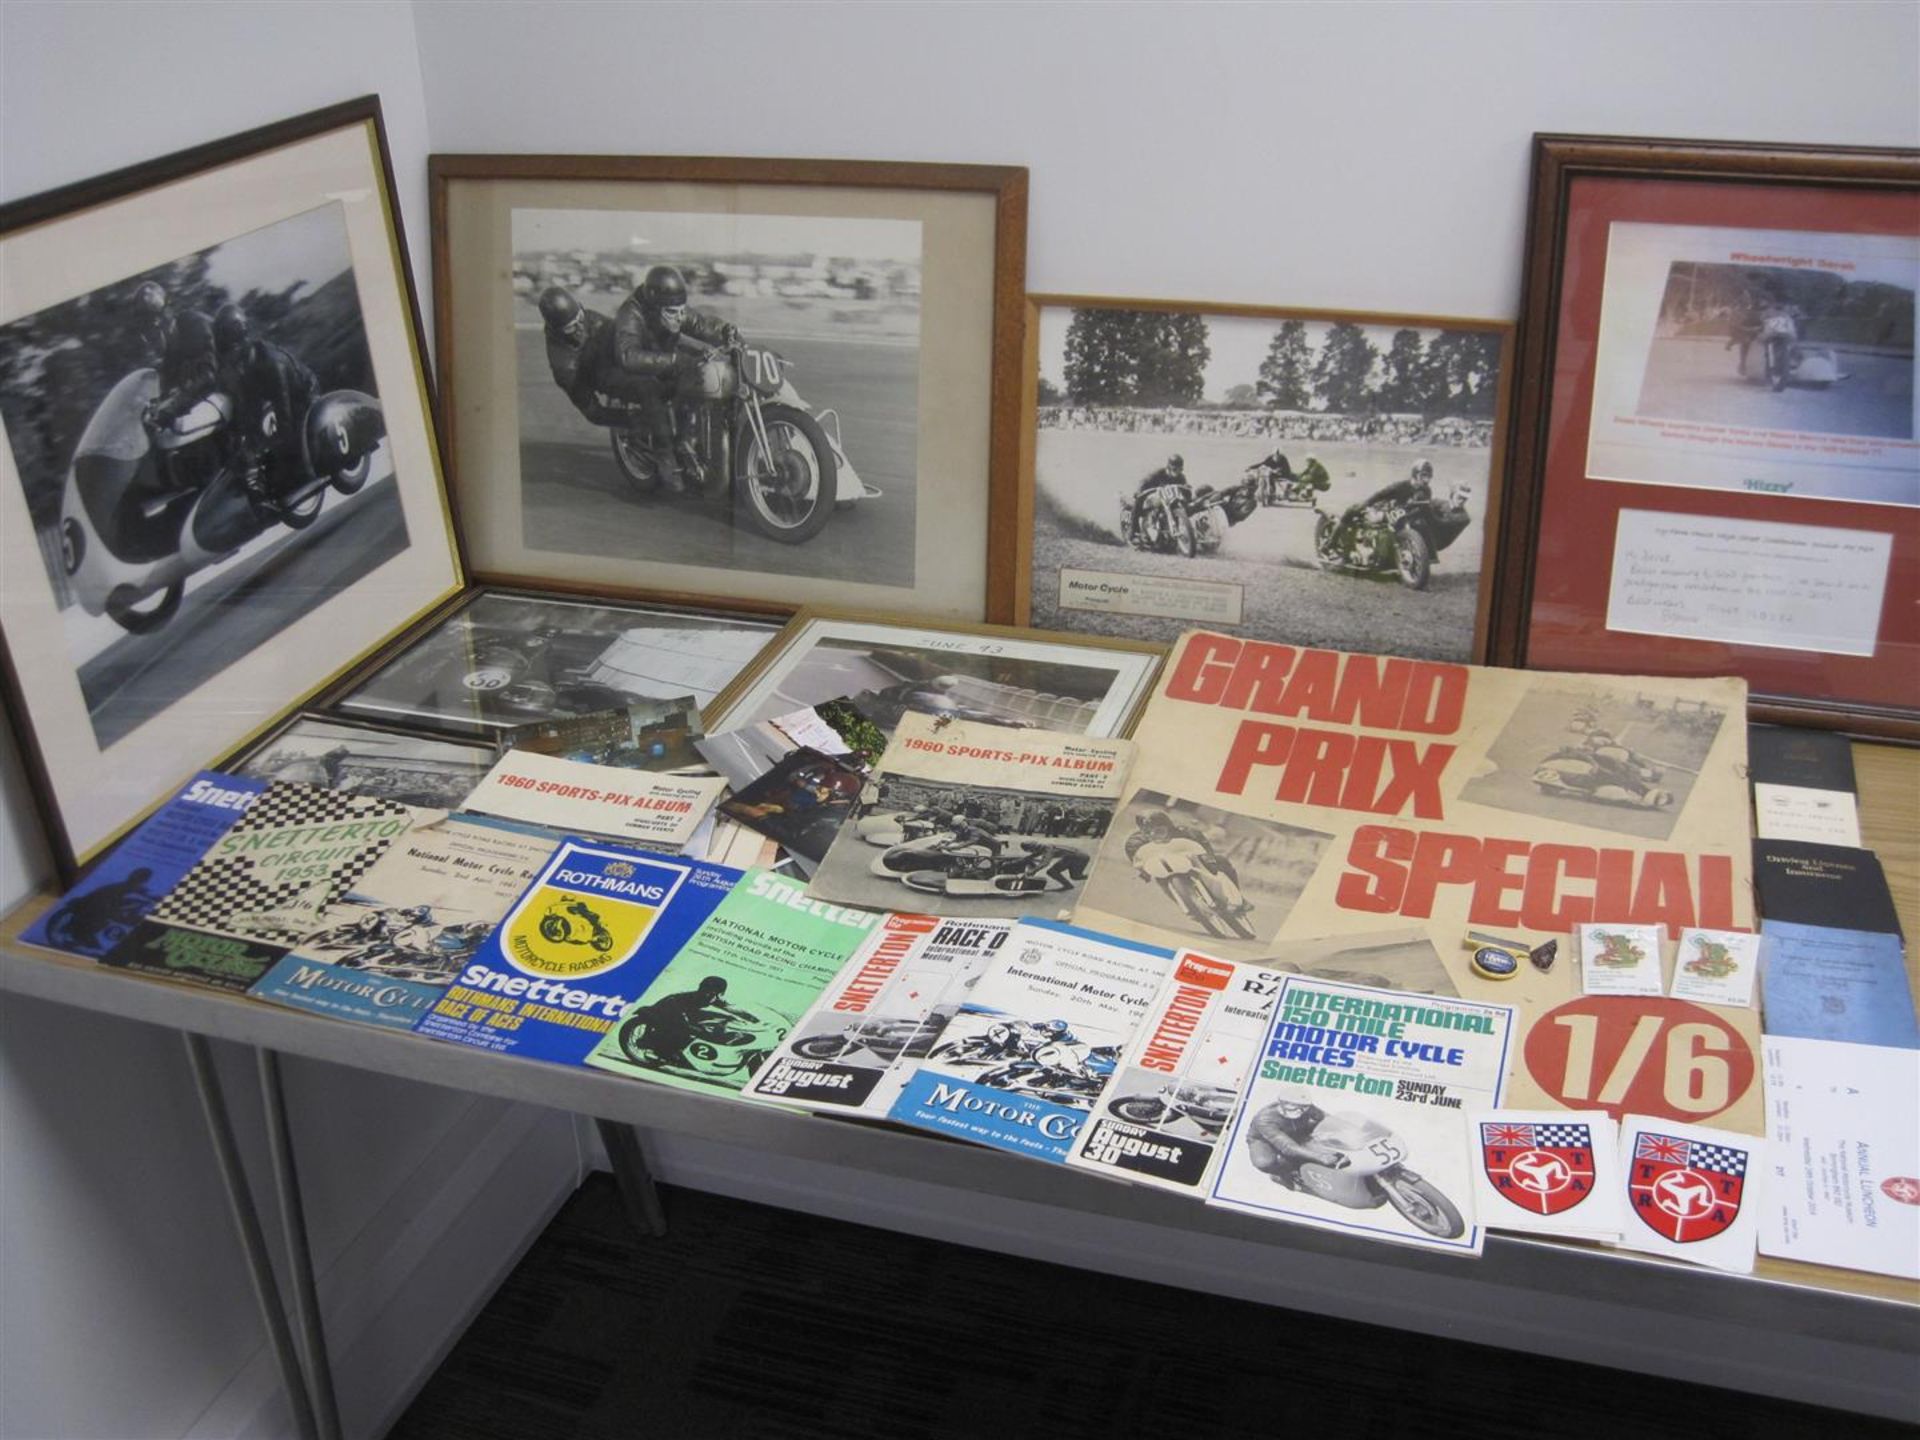 Derek Yorke, Grasstrack and Road sidecar racing, a qty of framed and glazed images, newspaper